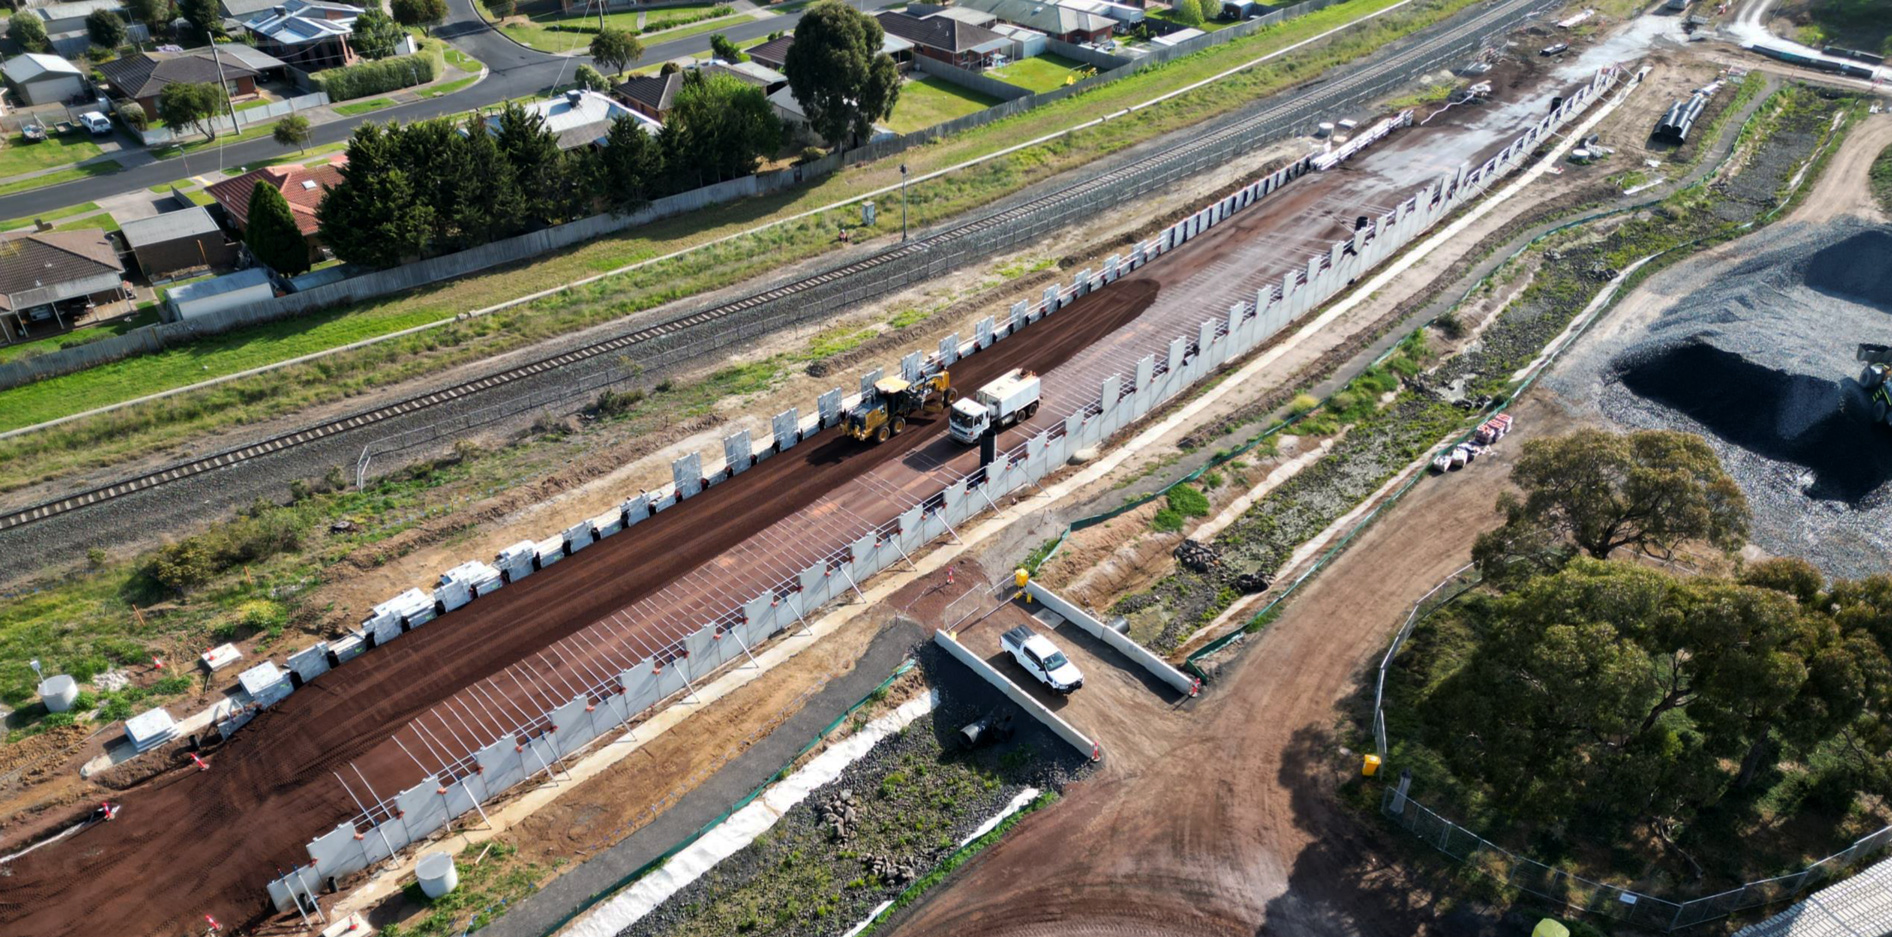 Aerial view of new construction works completed for the South Geelong to Waurn Ponds Duplication Rail Project